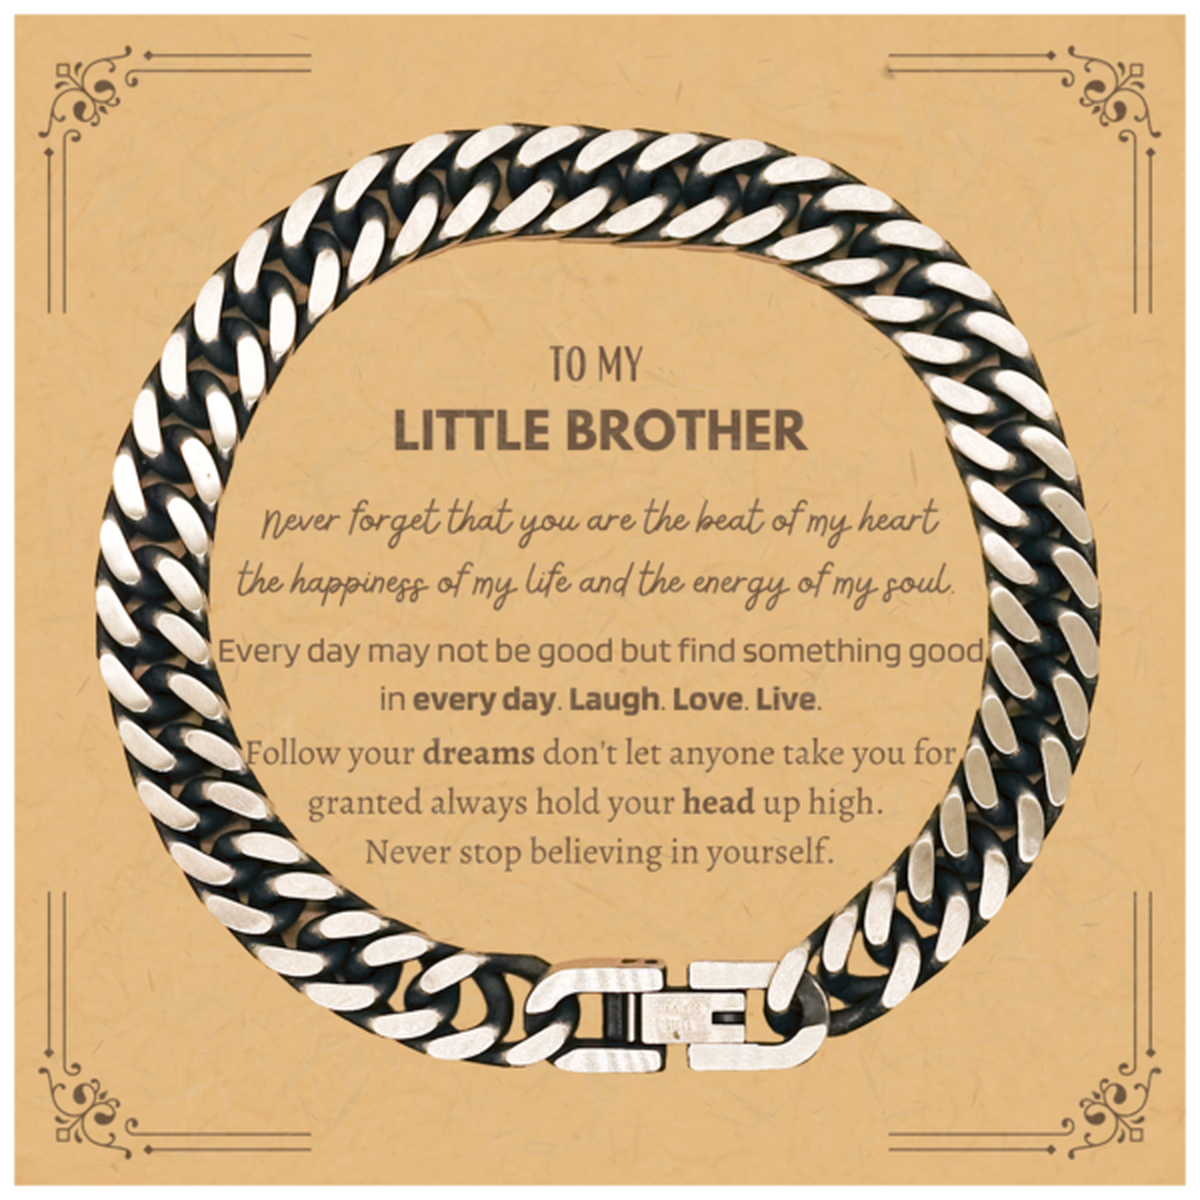 To My Little Brother Message Card Gifts, Christmas Little Brother Cuban Link Chain Bracelet Present, Birthday Unique Motivational For Little Brother, To My Little Brother Never forget that you are the beat of my heart the happiness of my life and the ener